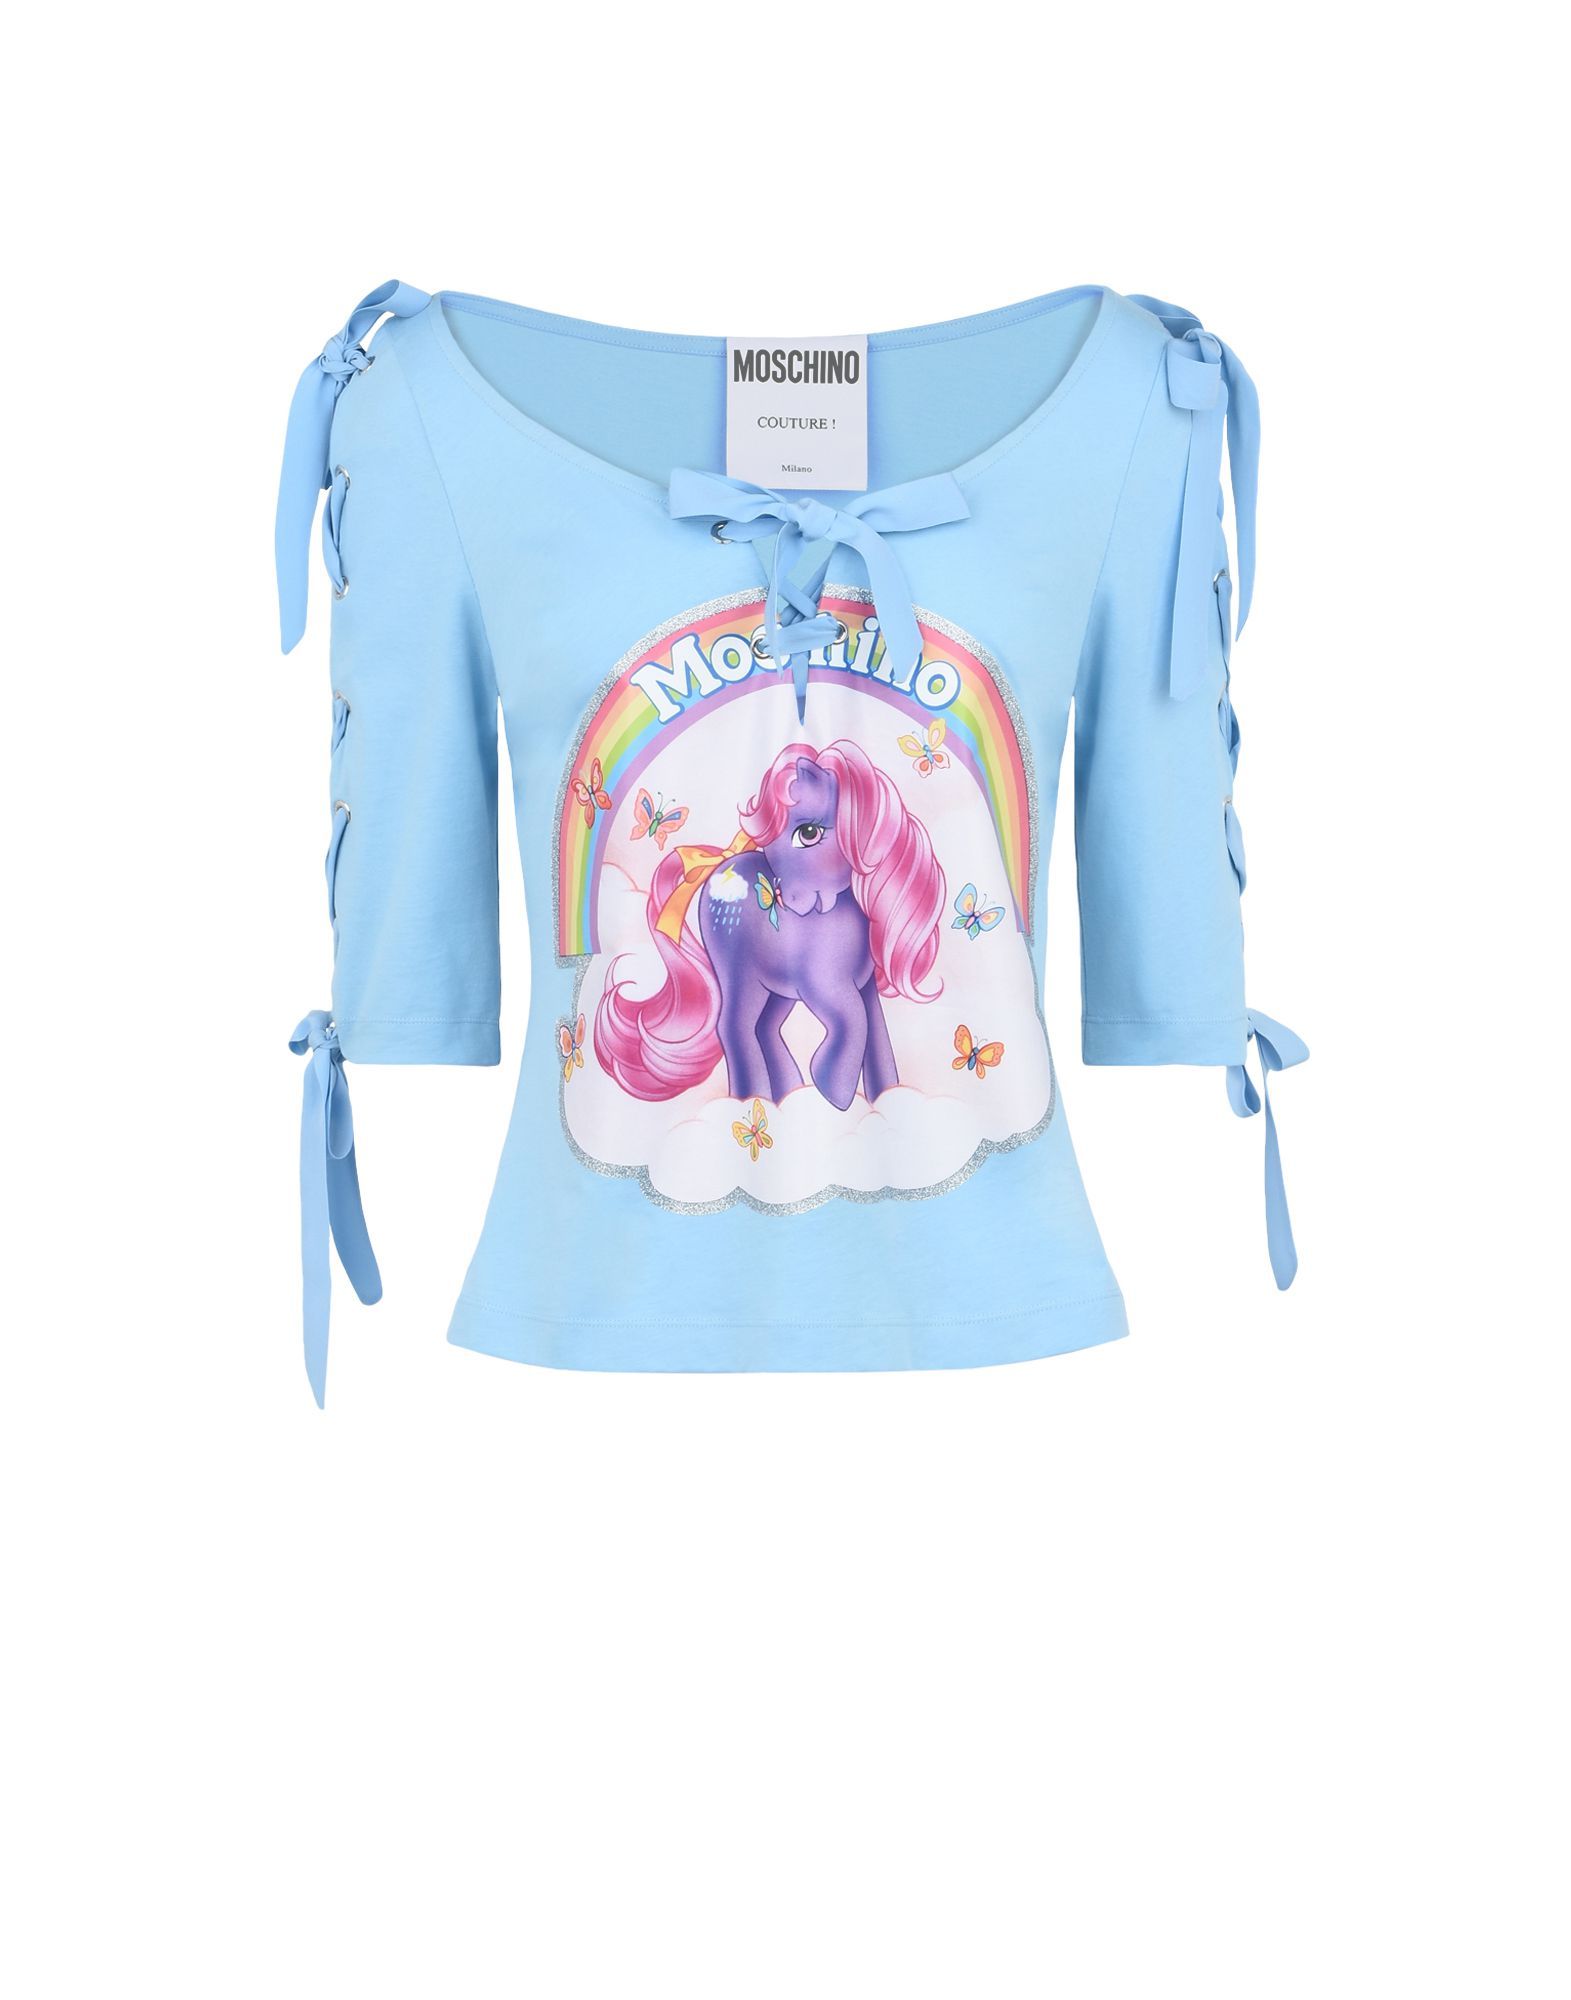 This Is What a $350 My Little Pony Tank Top Looks Like